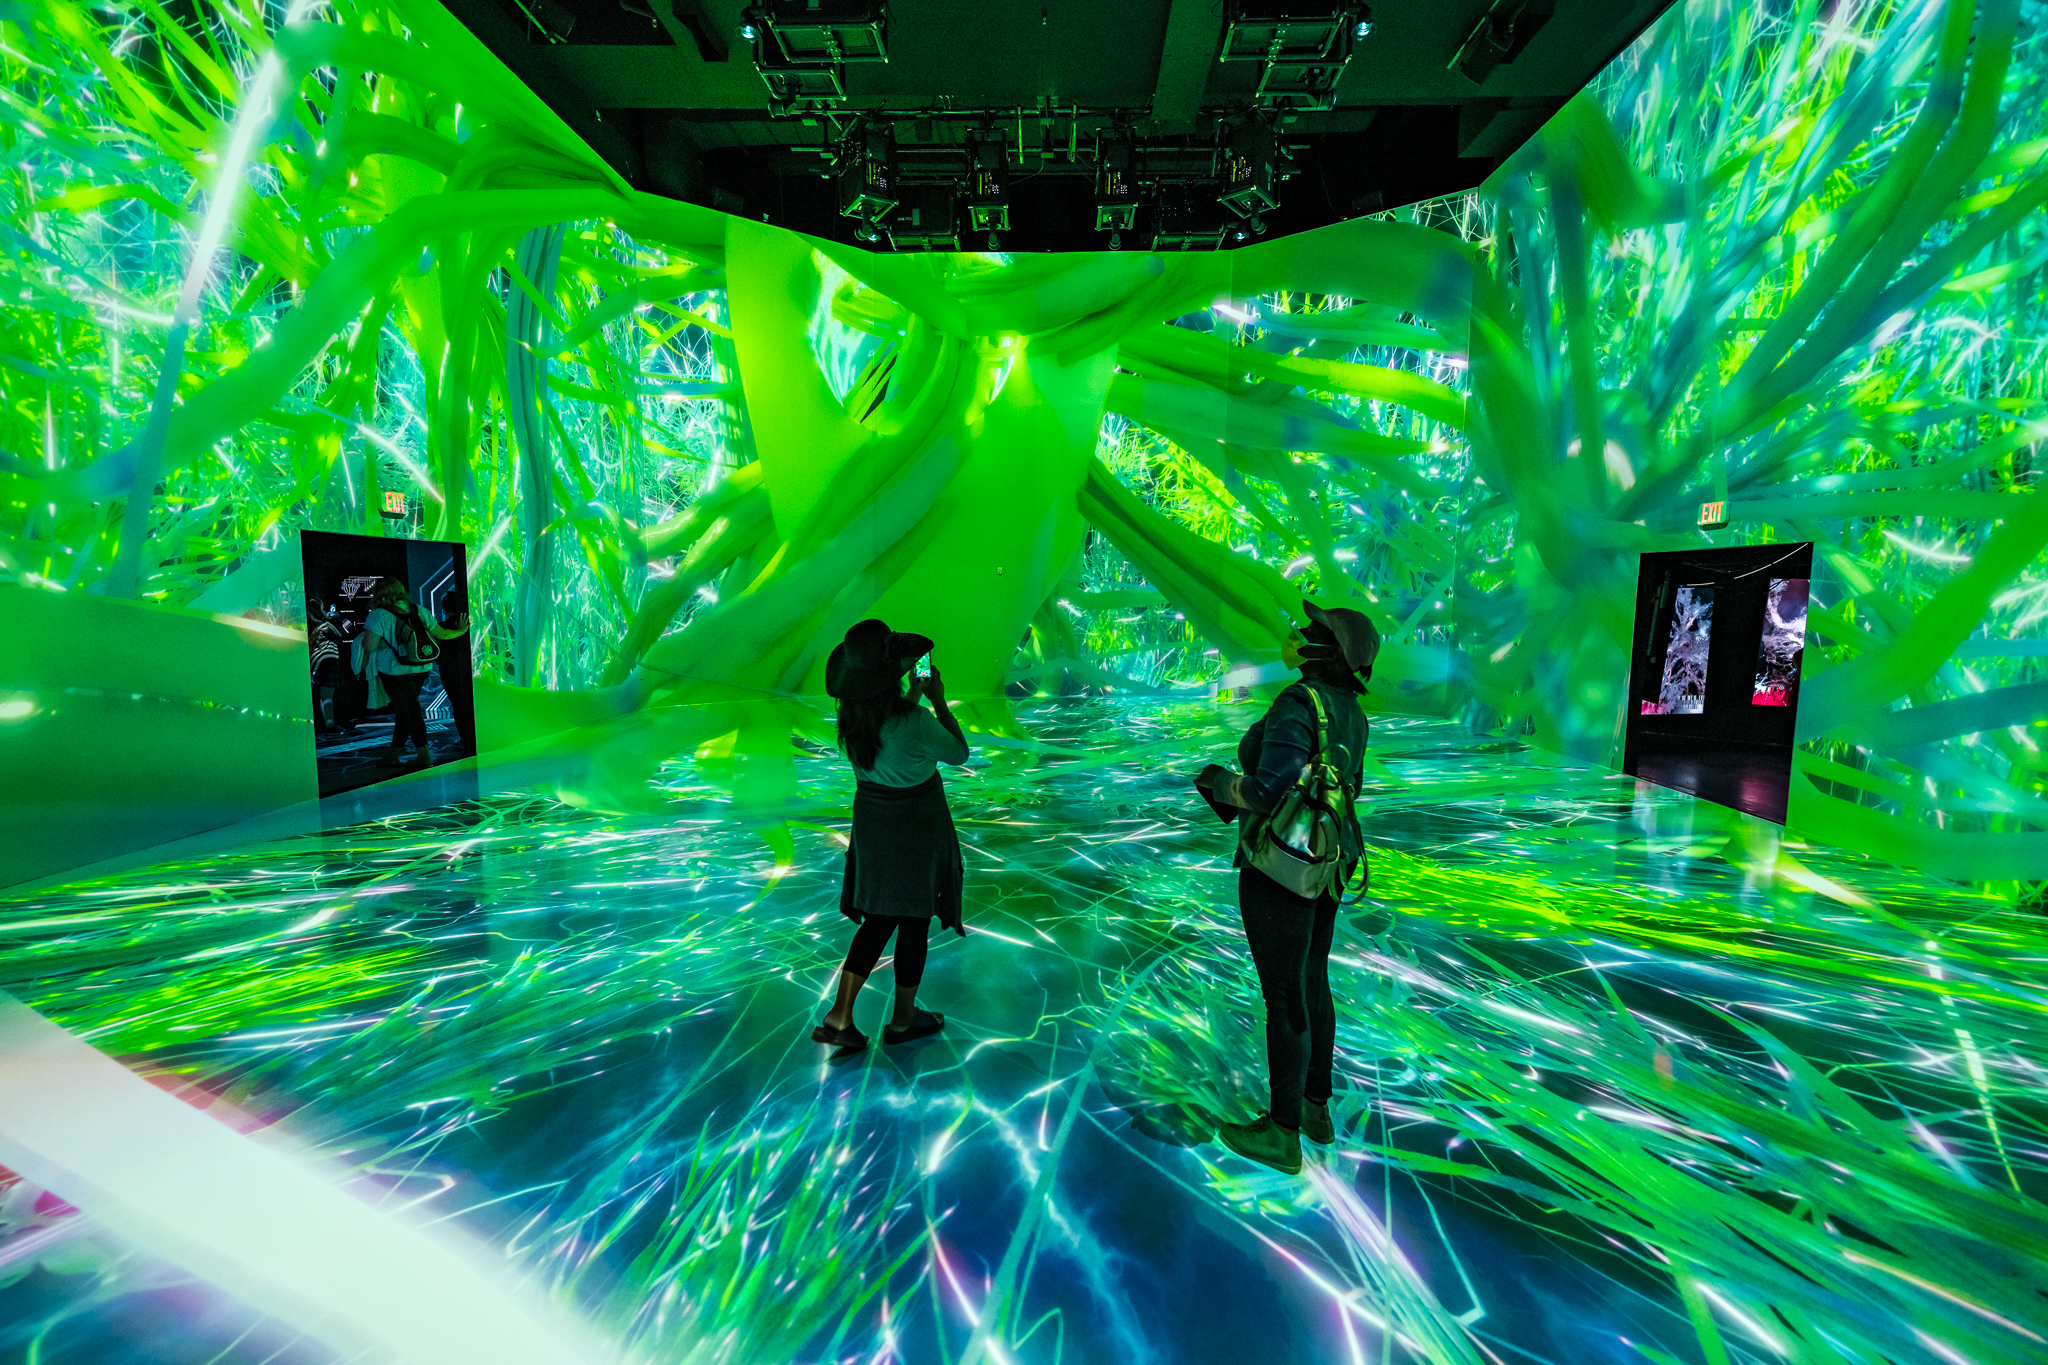 An image of two women observing the main display at the life of a Neuron exhibit from the SfN and ARTECHOUSE collaboration.